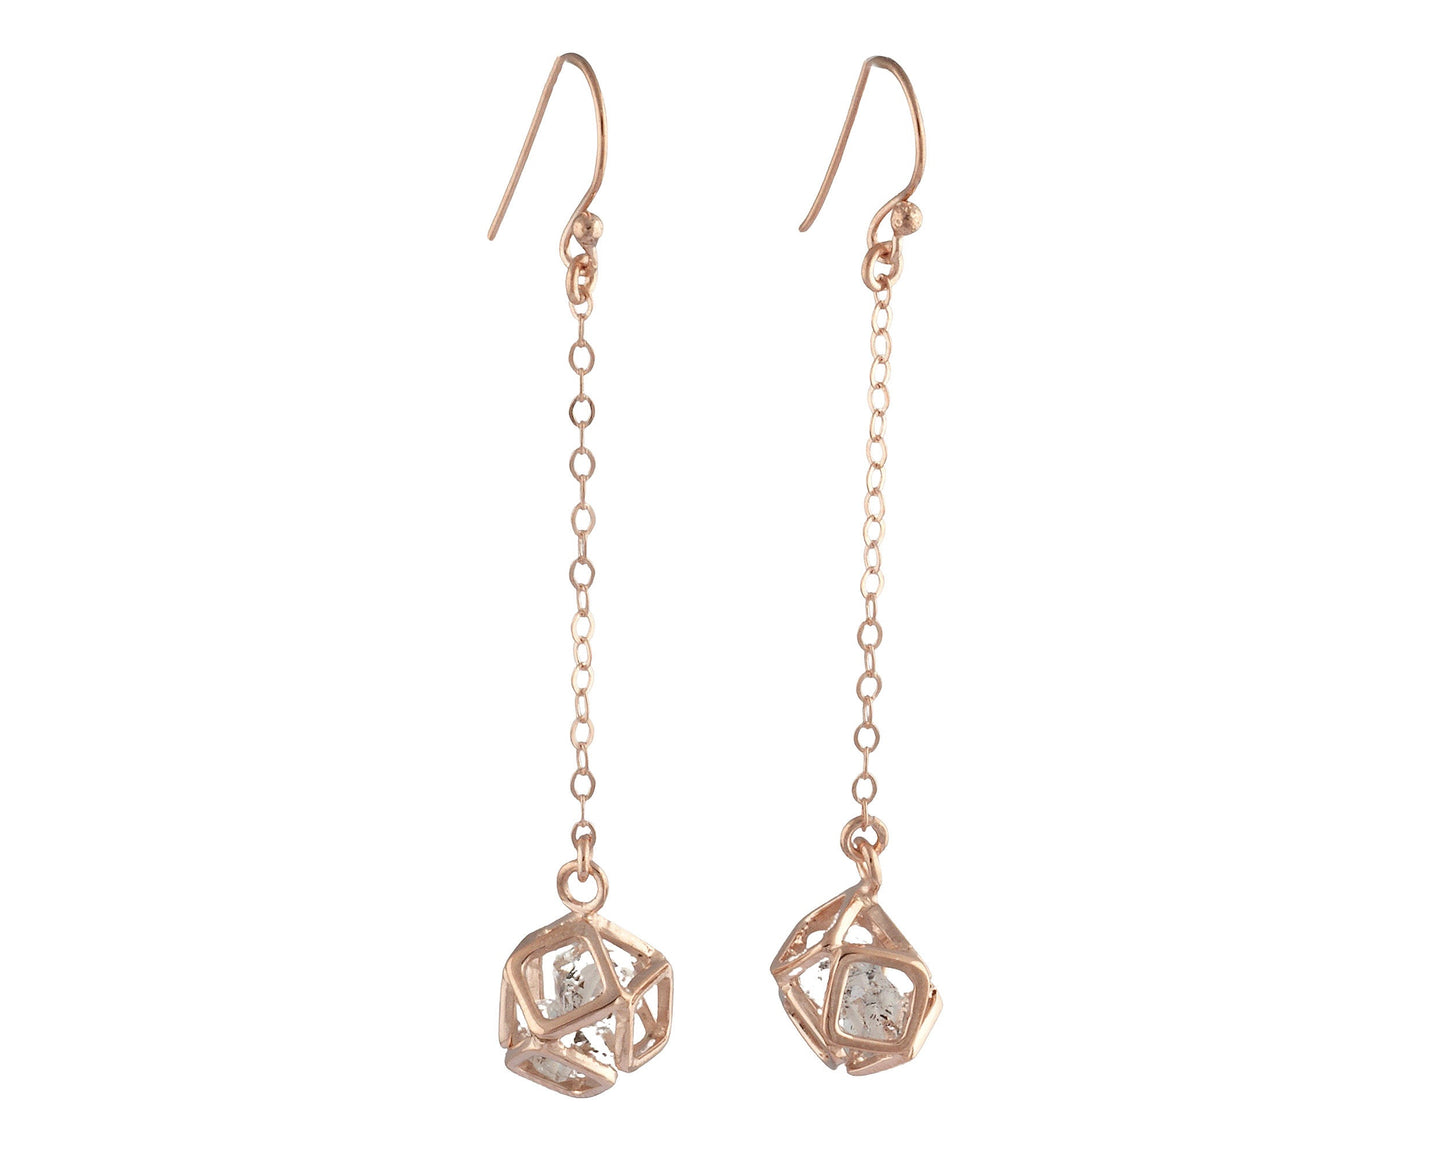 Solid 925 Sterling Silver Herkimer Diamond Cage Earrings Silver/Rose Gold Finish. April Birthstone, Gift for her. Woman/Girl, Anniversary.